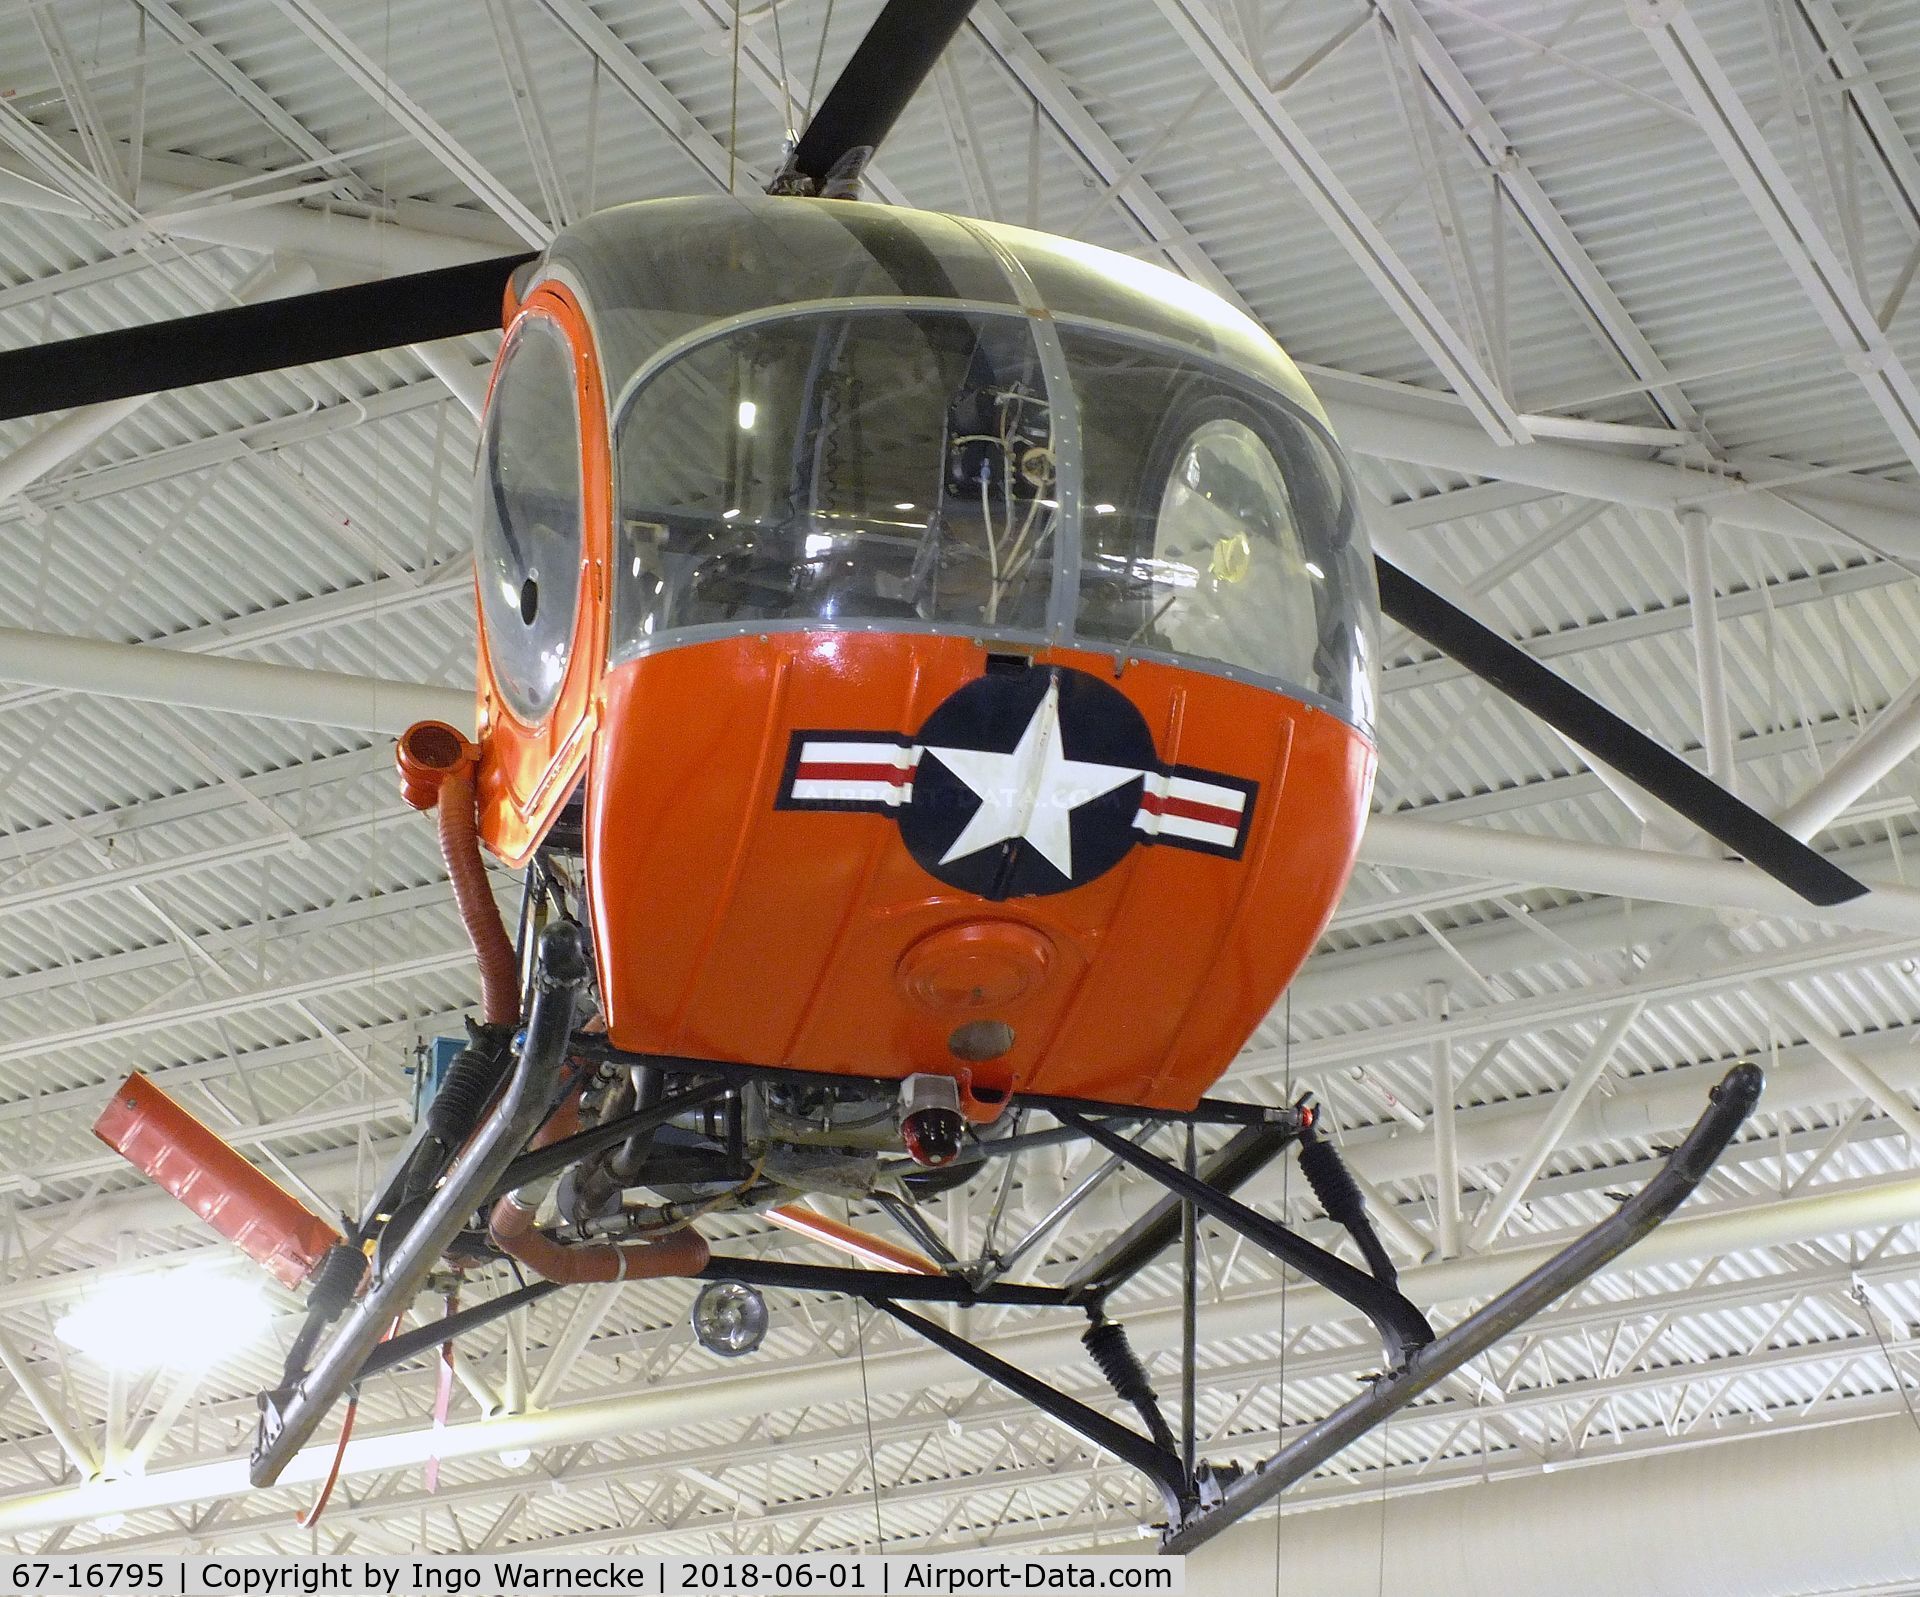 67-16795, 1967 Hughes TH-55A Osage C/N 78-0902, Hughes TH-55A Osage at the US Army Aviation Museum, Ft. Rucker